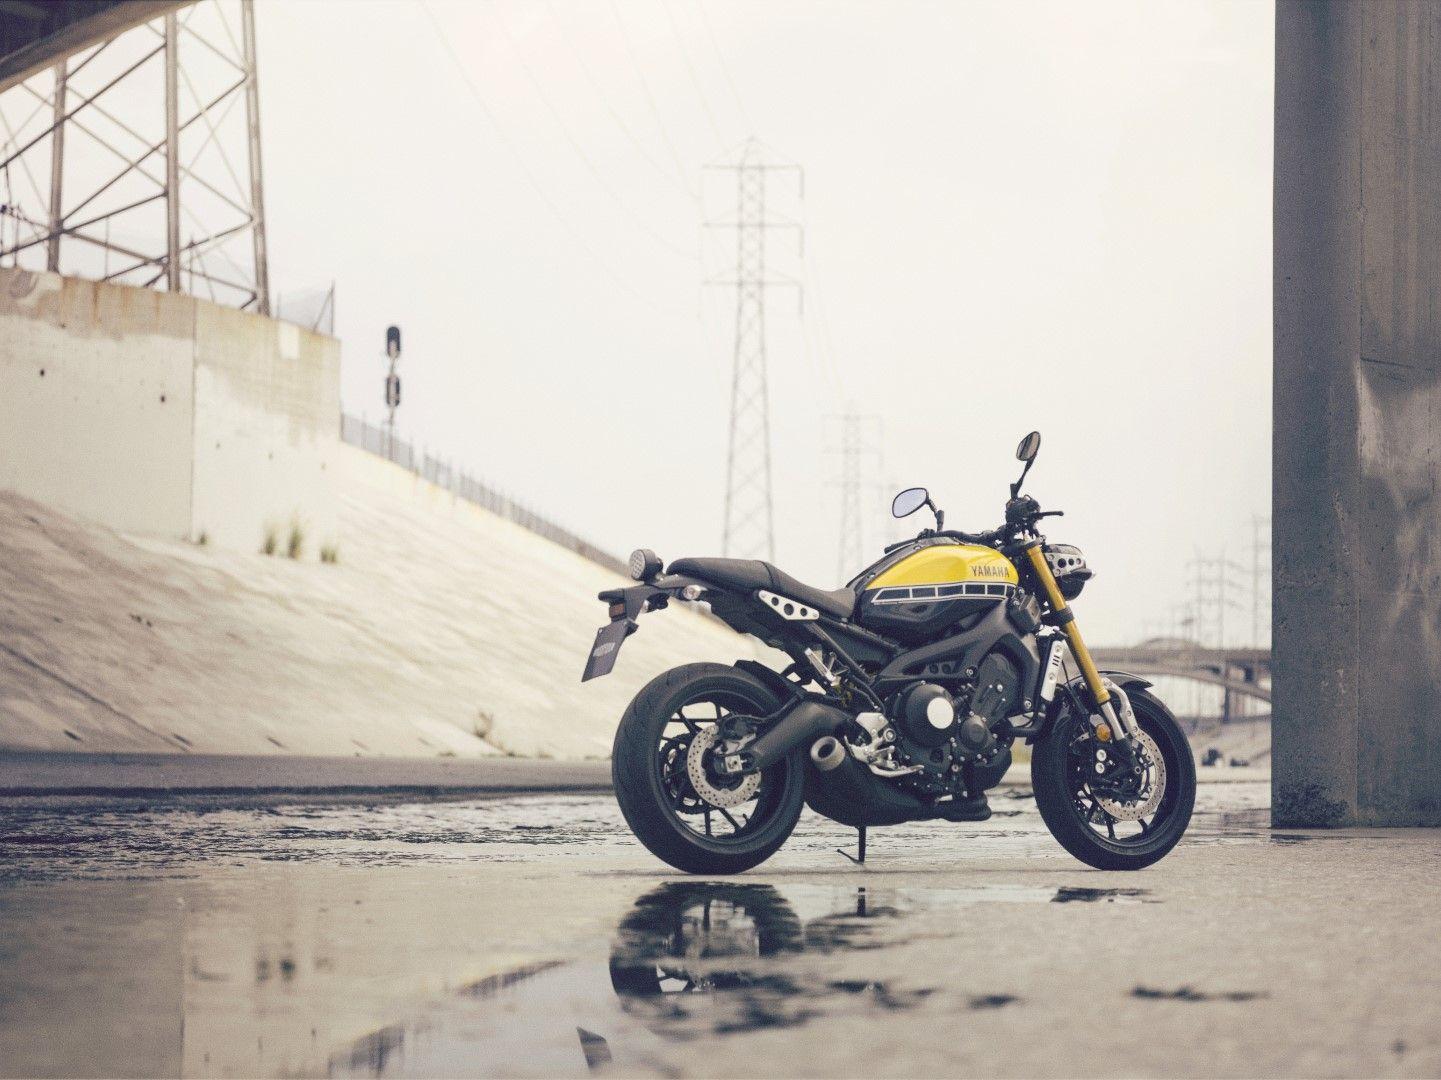 Yamaha XSR900 joins the 'Faster Sons' Sport Heritage range